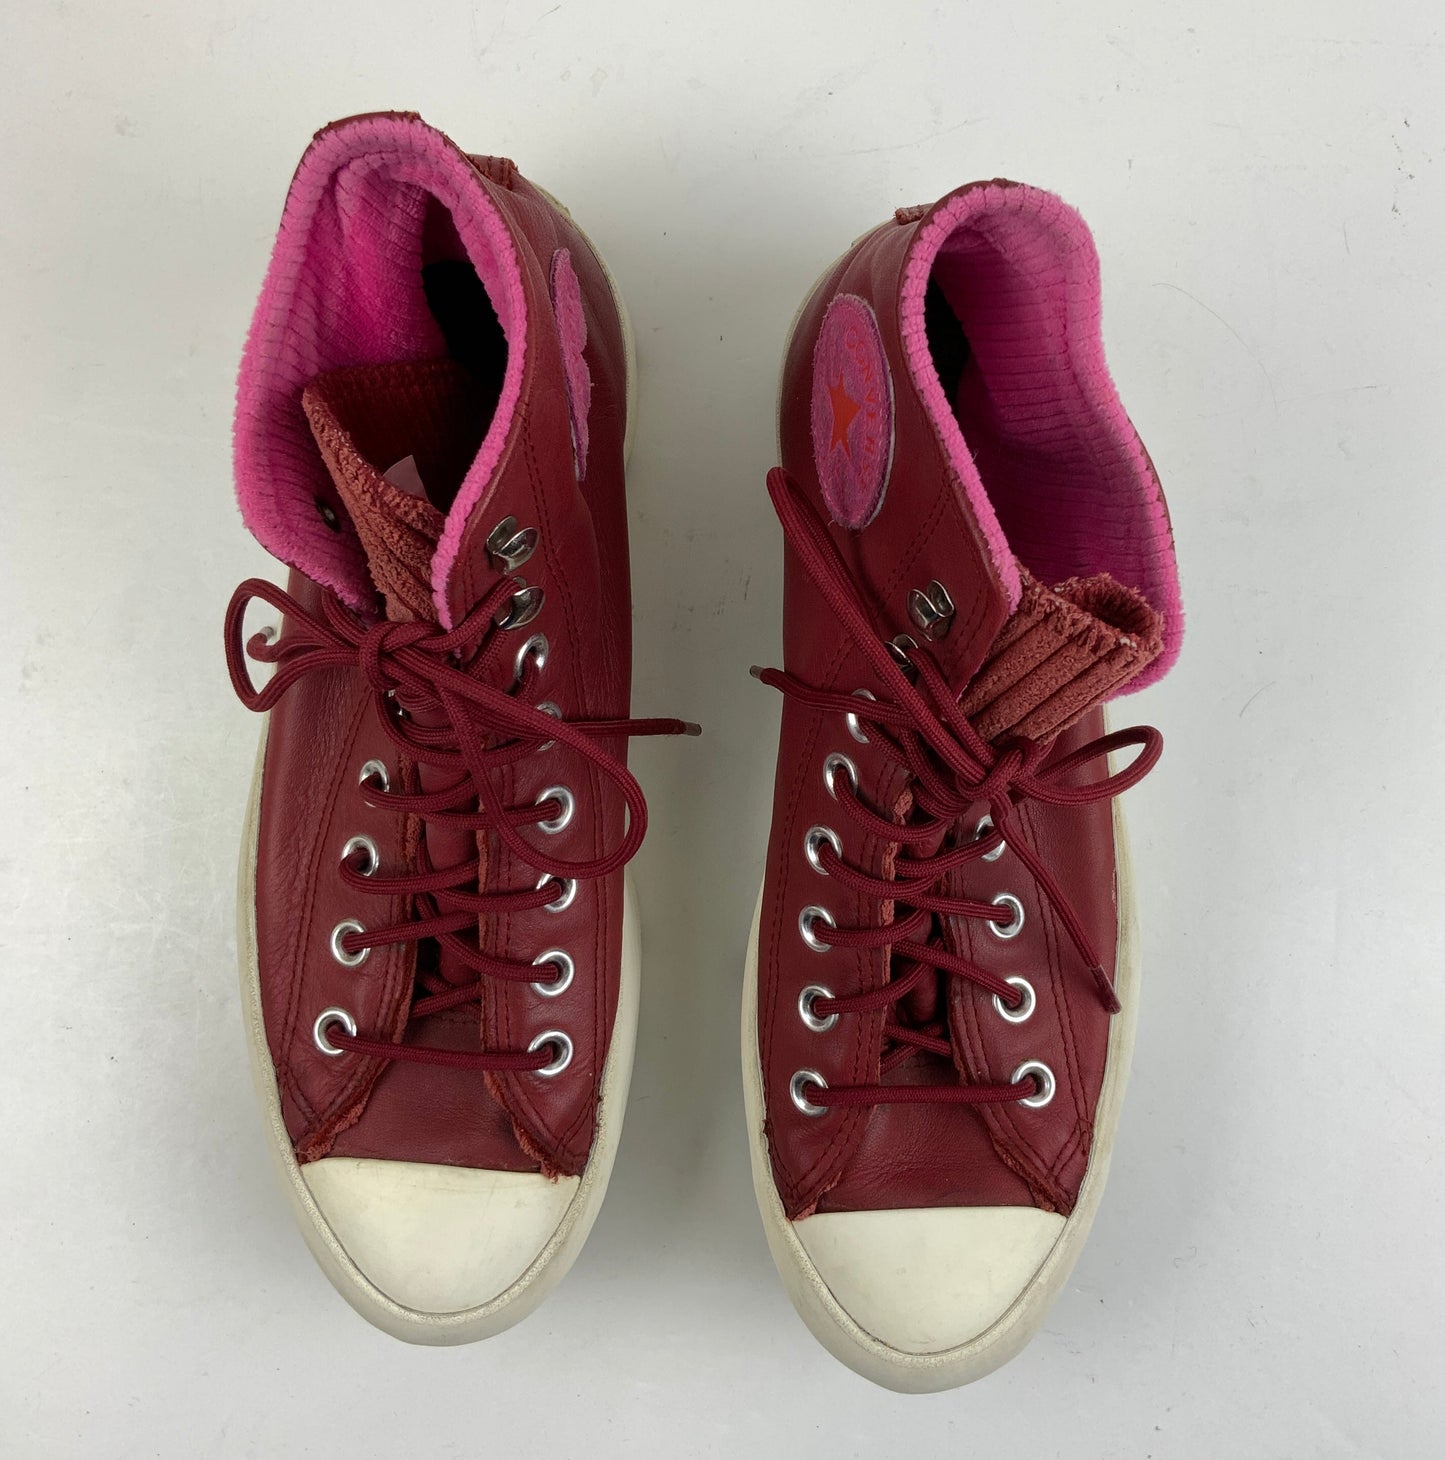 Red Shoes Sneakers Platform Converse, Size 8.5